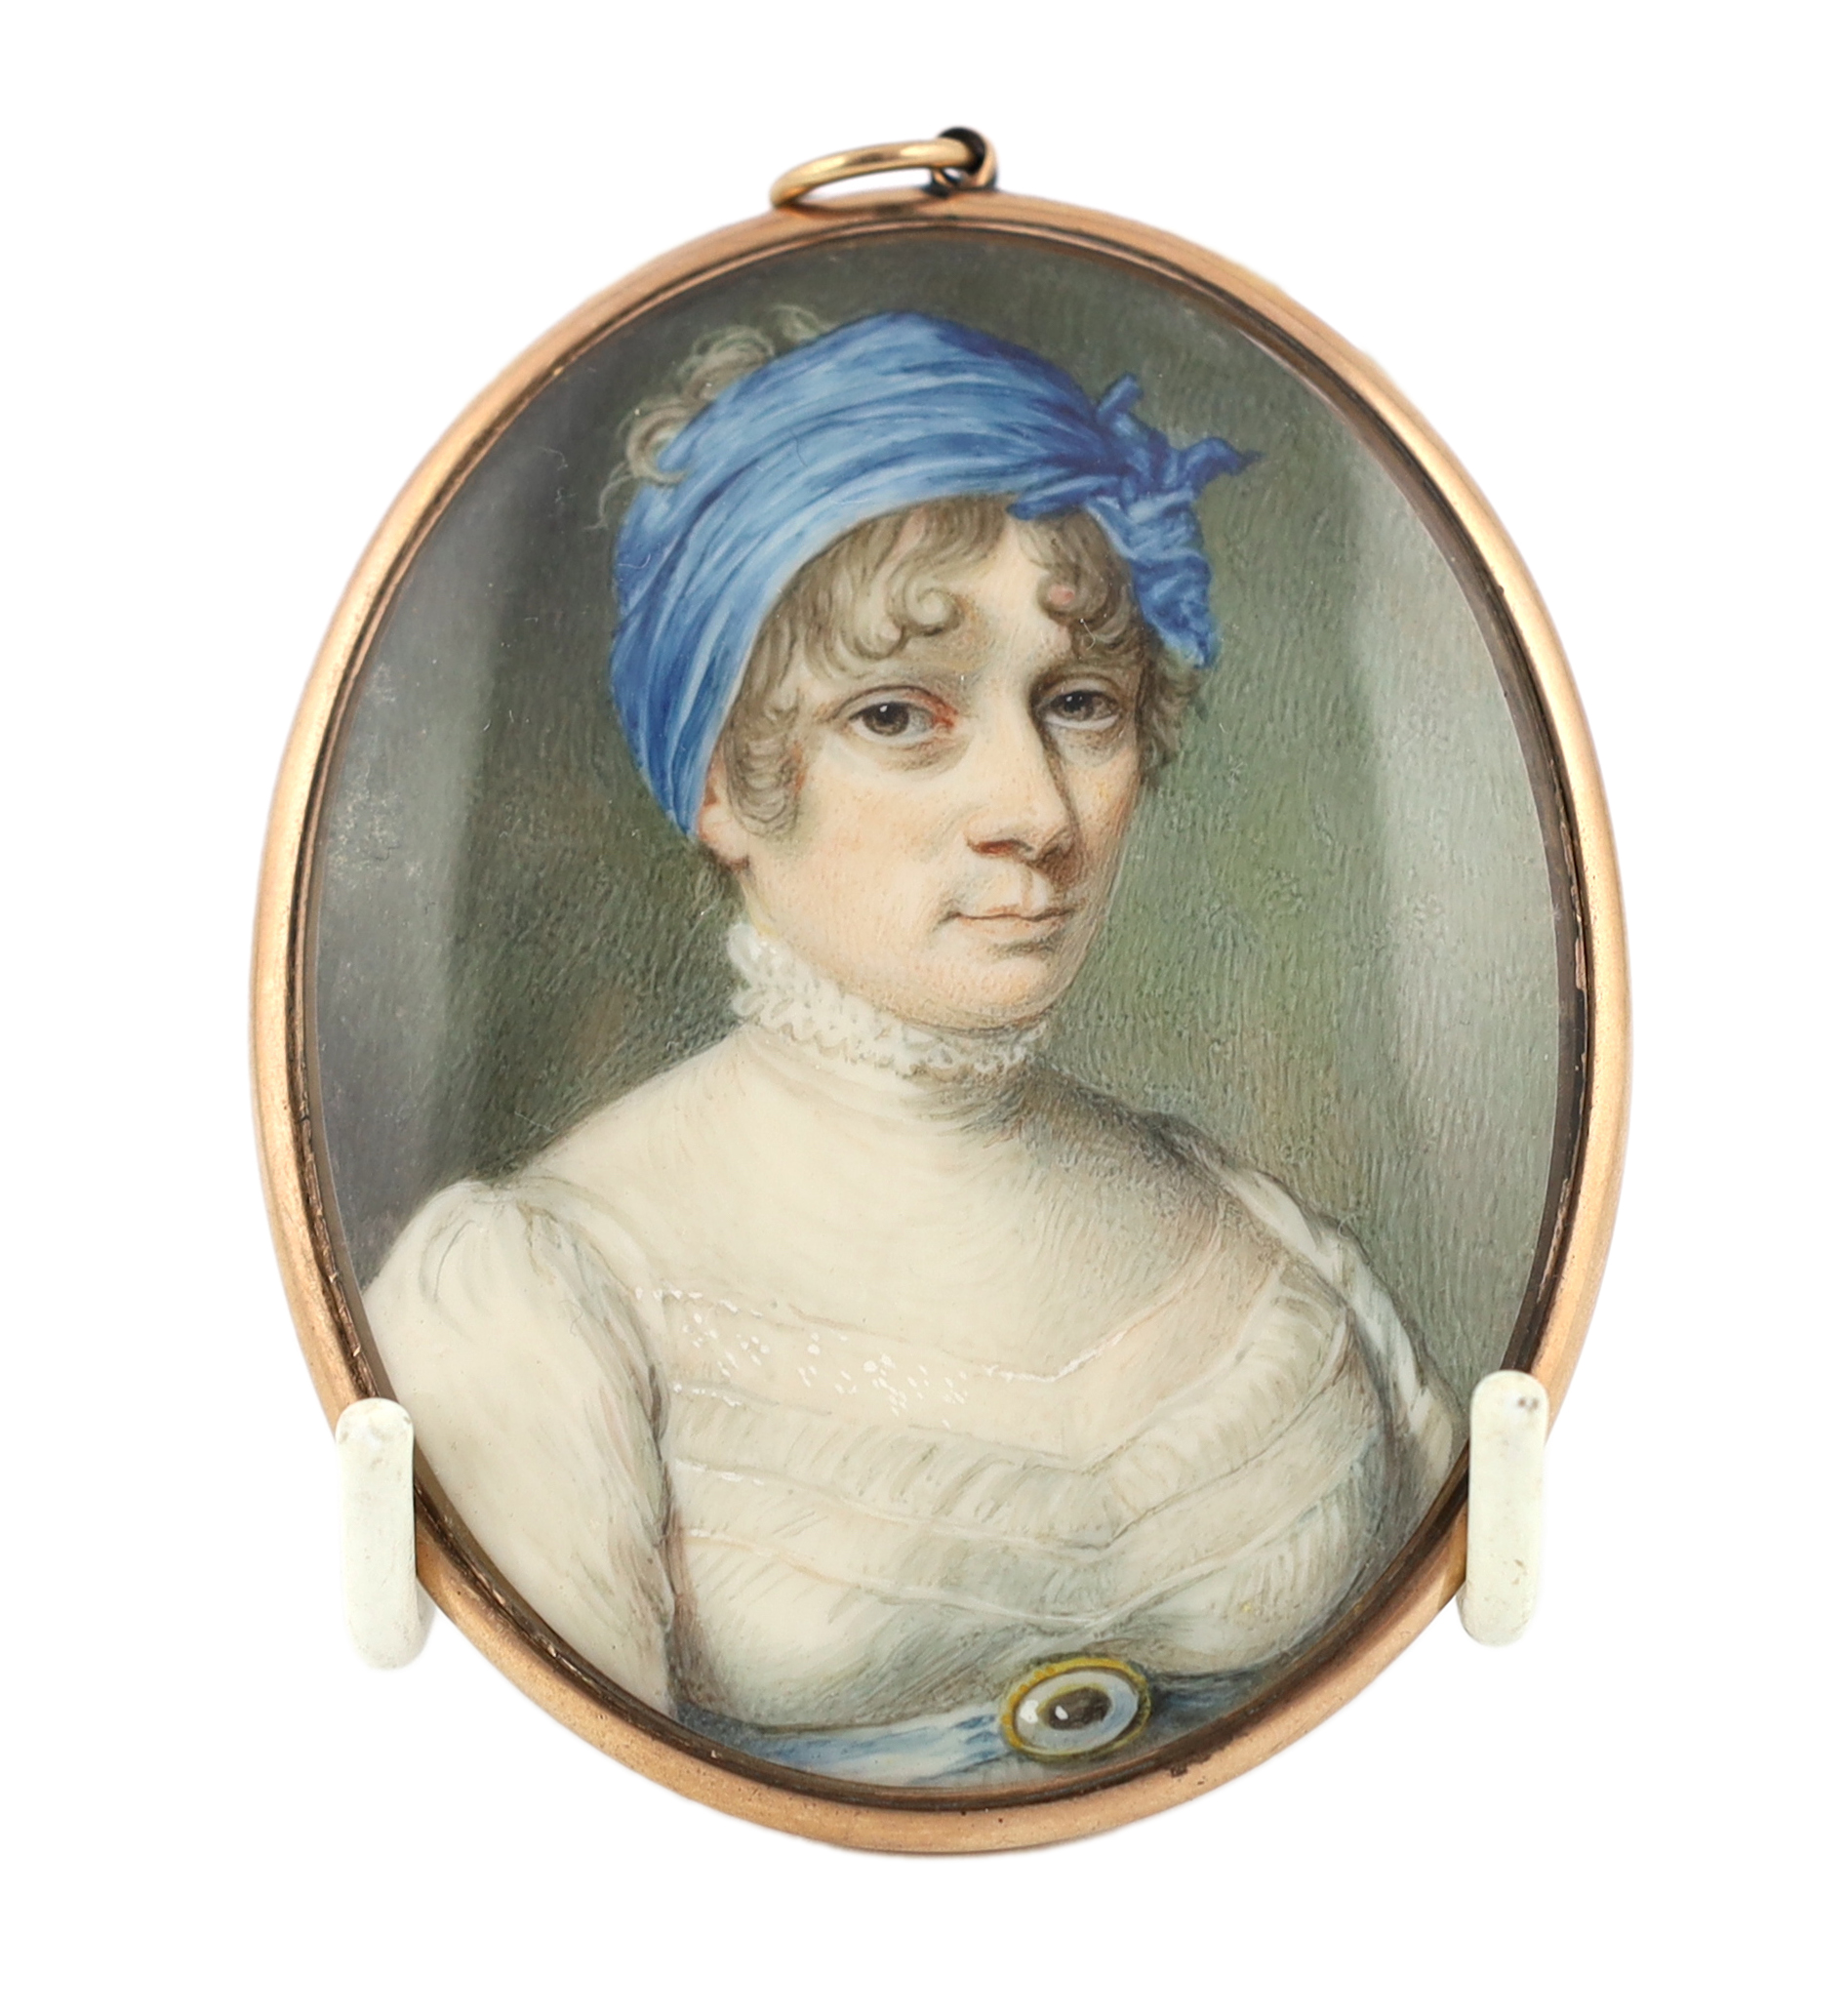 Thomas Richmond (British, 1771-1837), Portrait miniature of a lady, watercolour on ivory, 7.5 x 5.8cm. CITES Submission reference S1AX5KHB